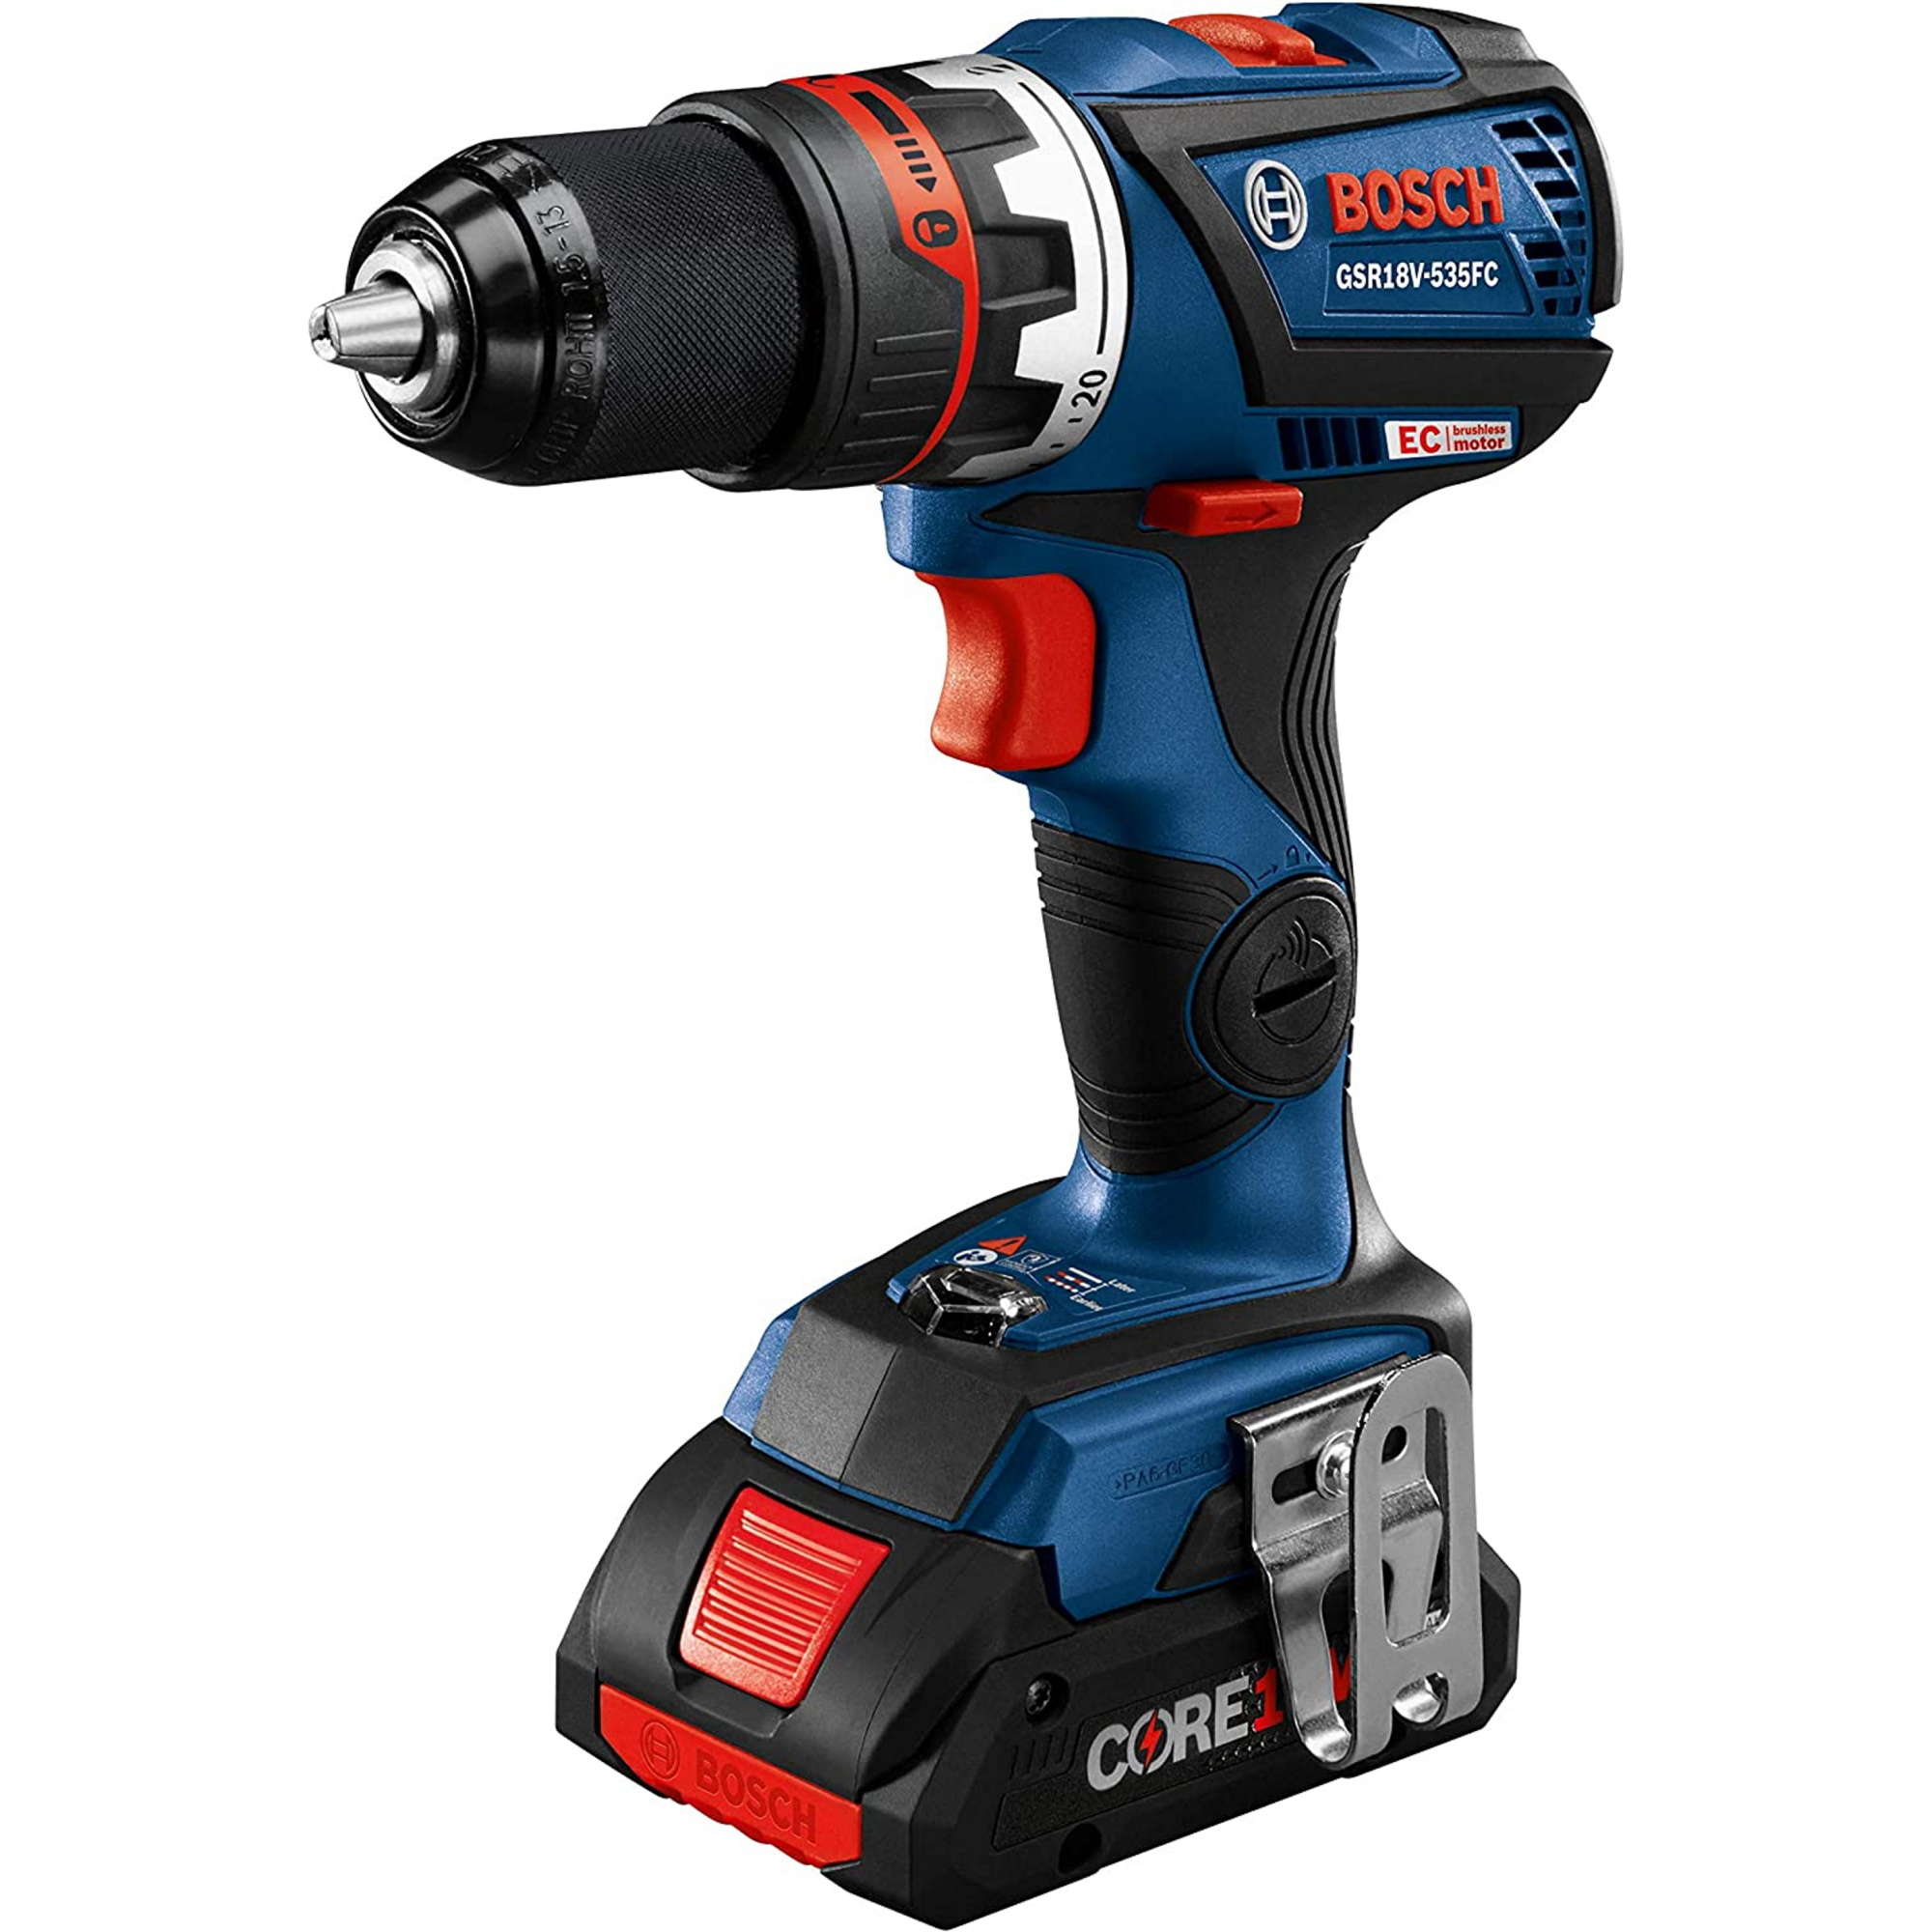 Bosch 18V Chameleon Drill/Driver w/ 5-In-1 Flexiclick System and 4.0 Ah CORE18V Compact Battery - GSR18V-535FCB15